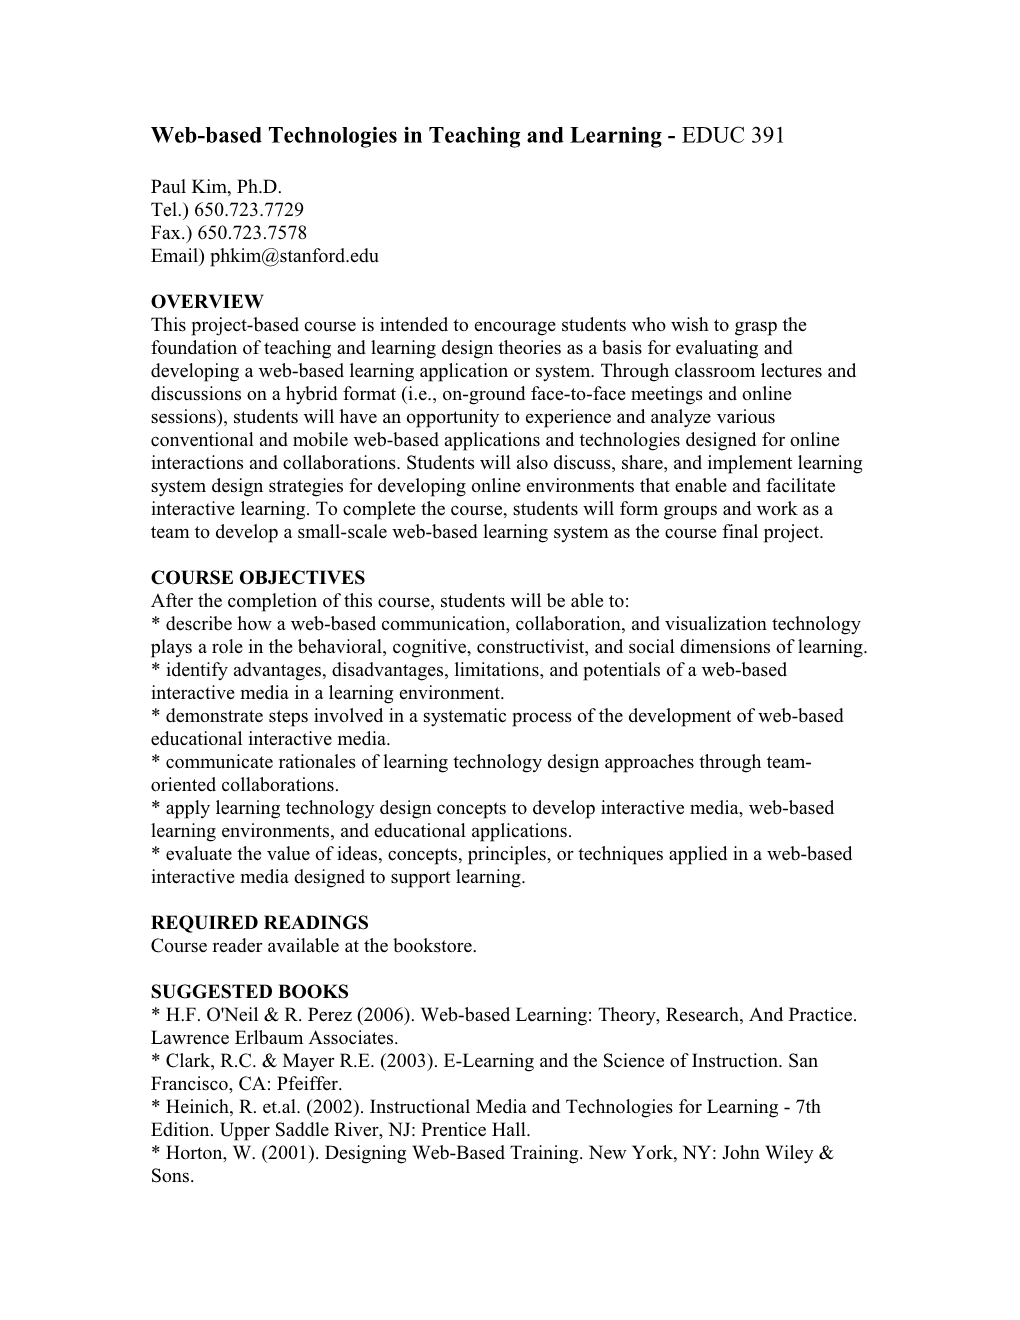 Web-Based Technologies in Teaching and Learning - EDUC 391